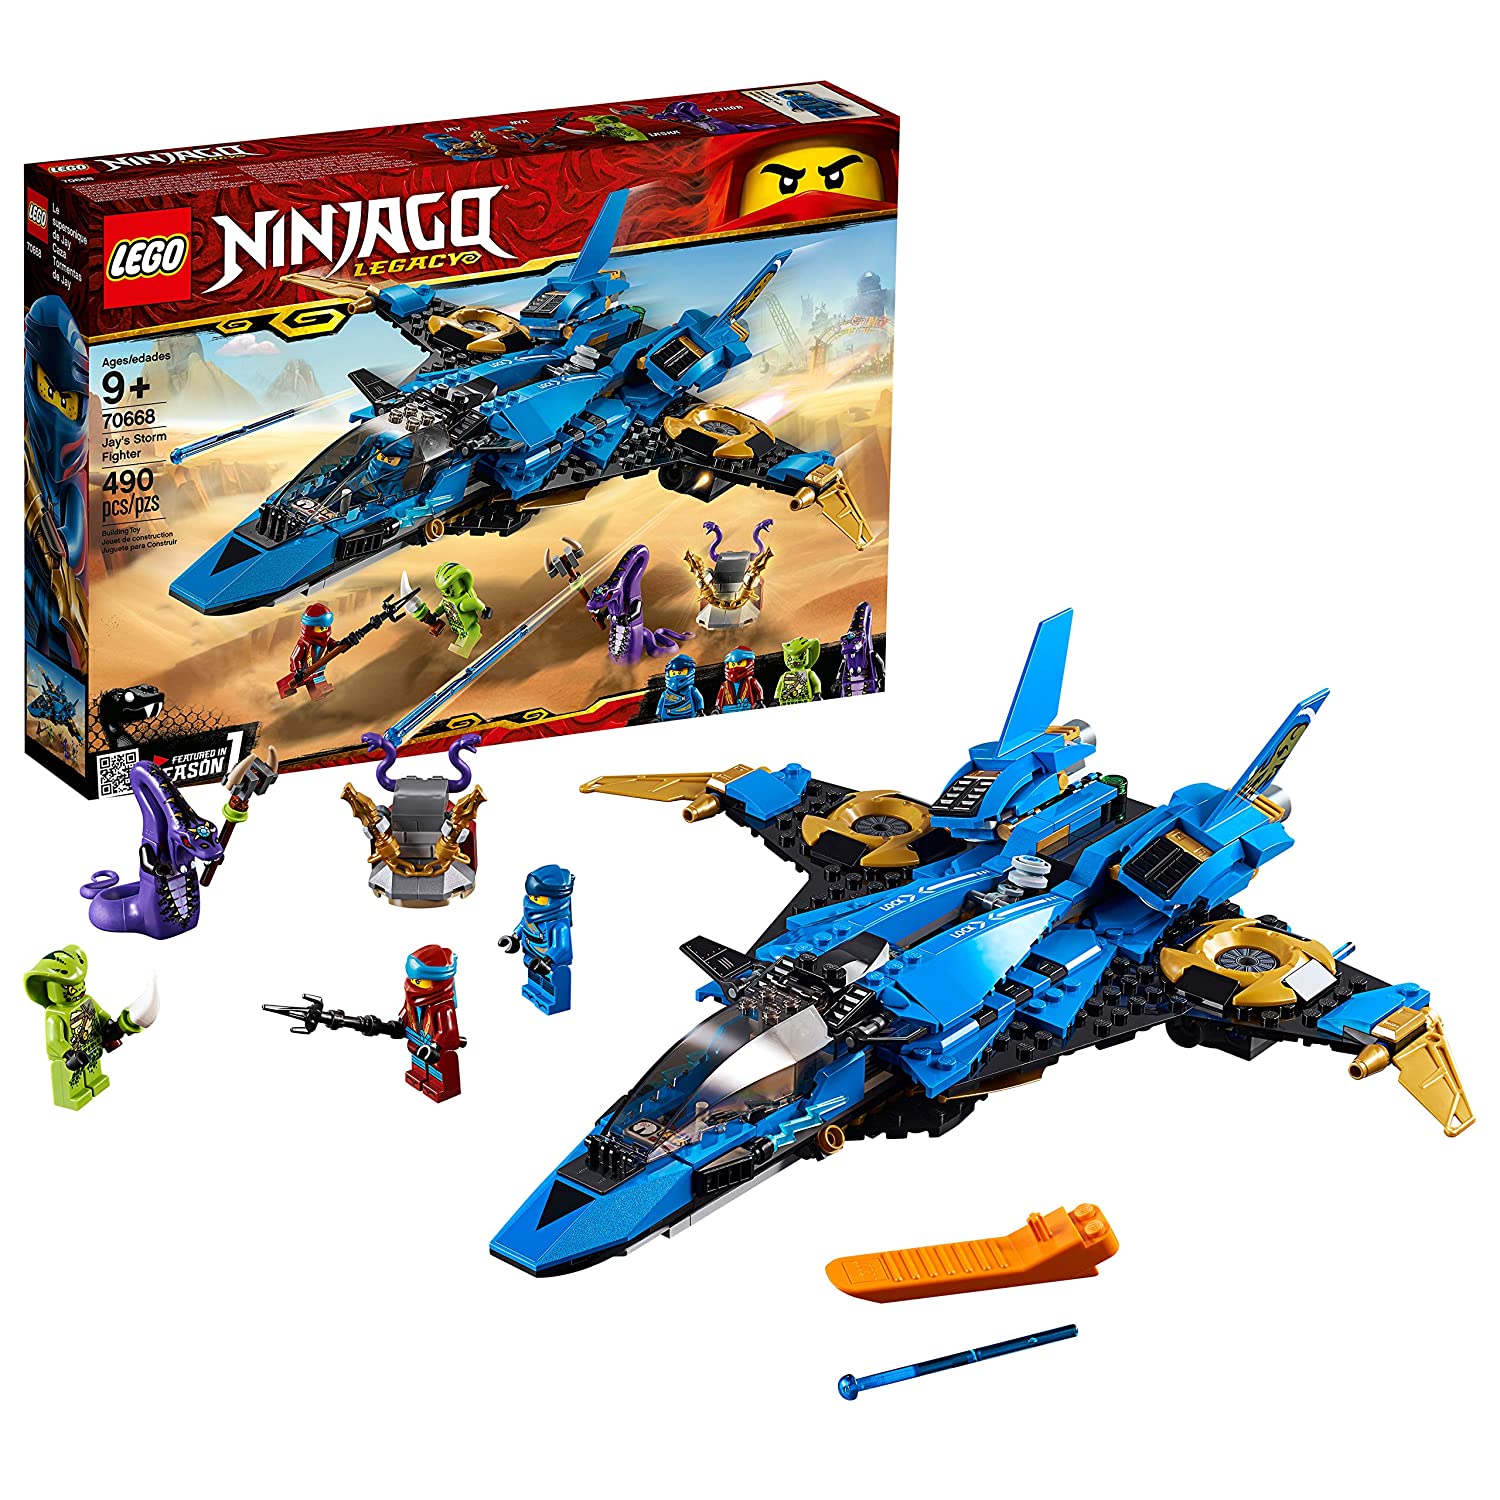 LEGO NINJAGO Legacy Jay’s Storm Fighter 70668 Building Kit, New 2019 (490 Pieces)